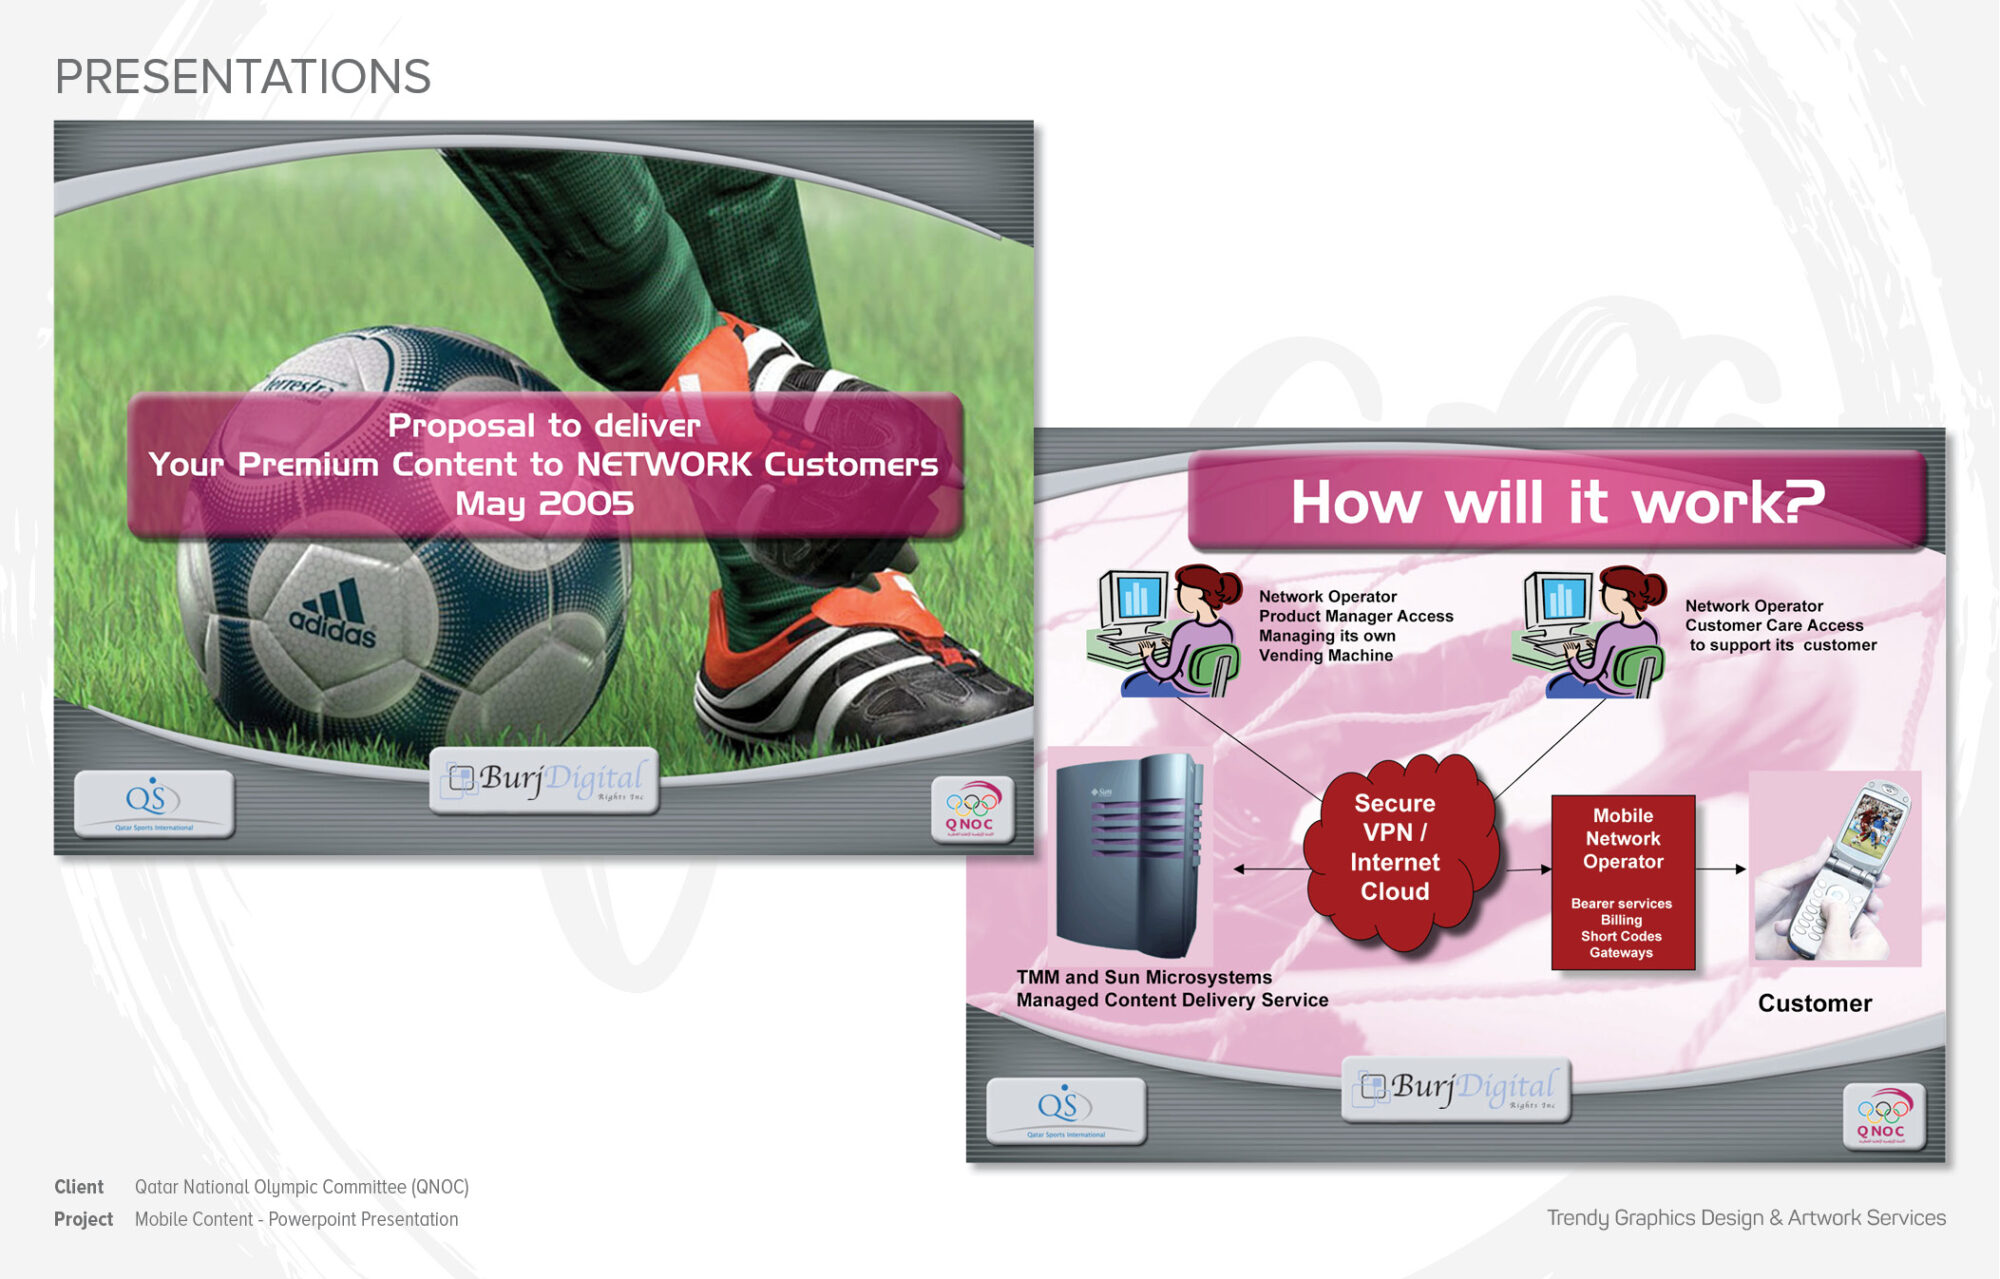 Qatar National Olympic Committee (QNOC) – Mobile Content Powerpoint Presentation